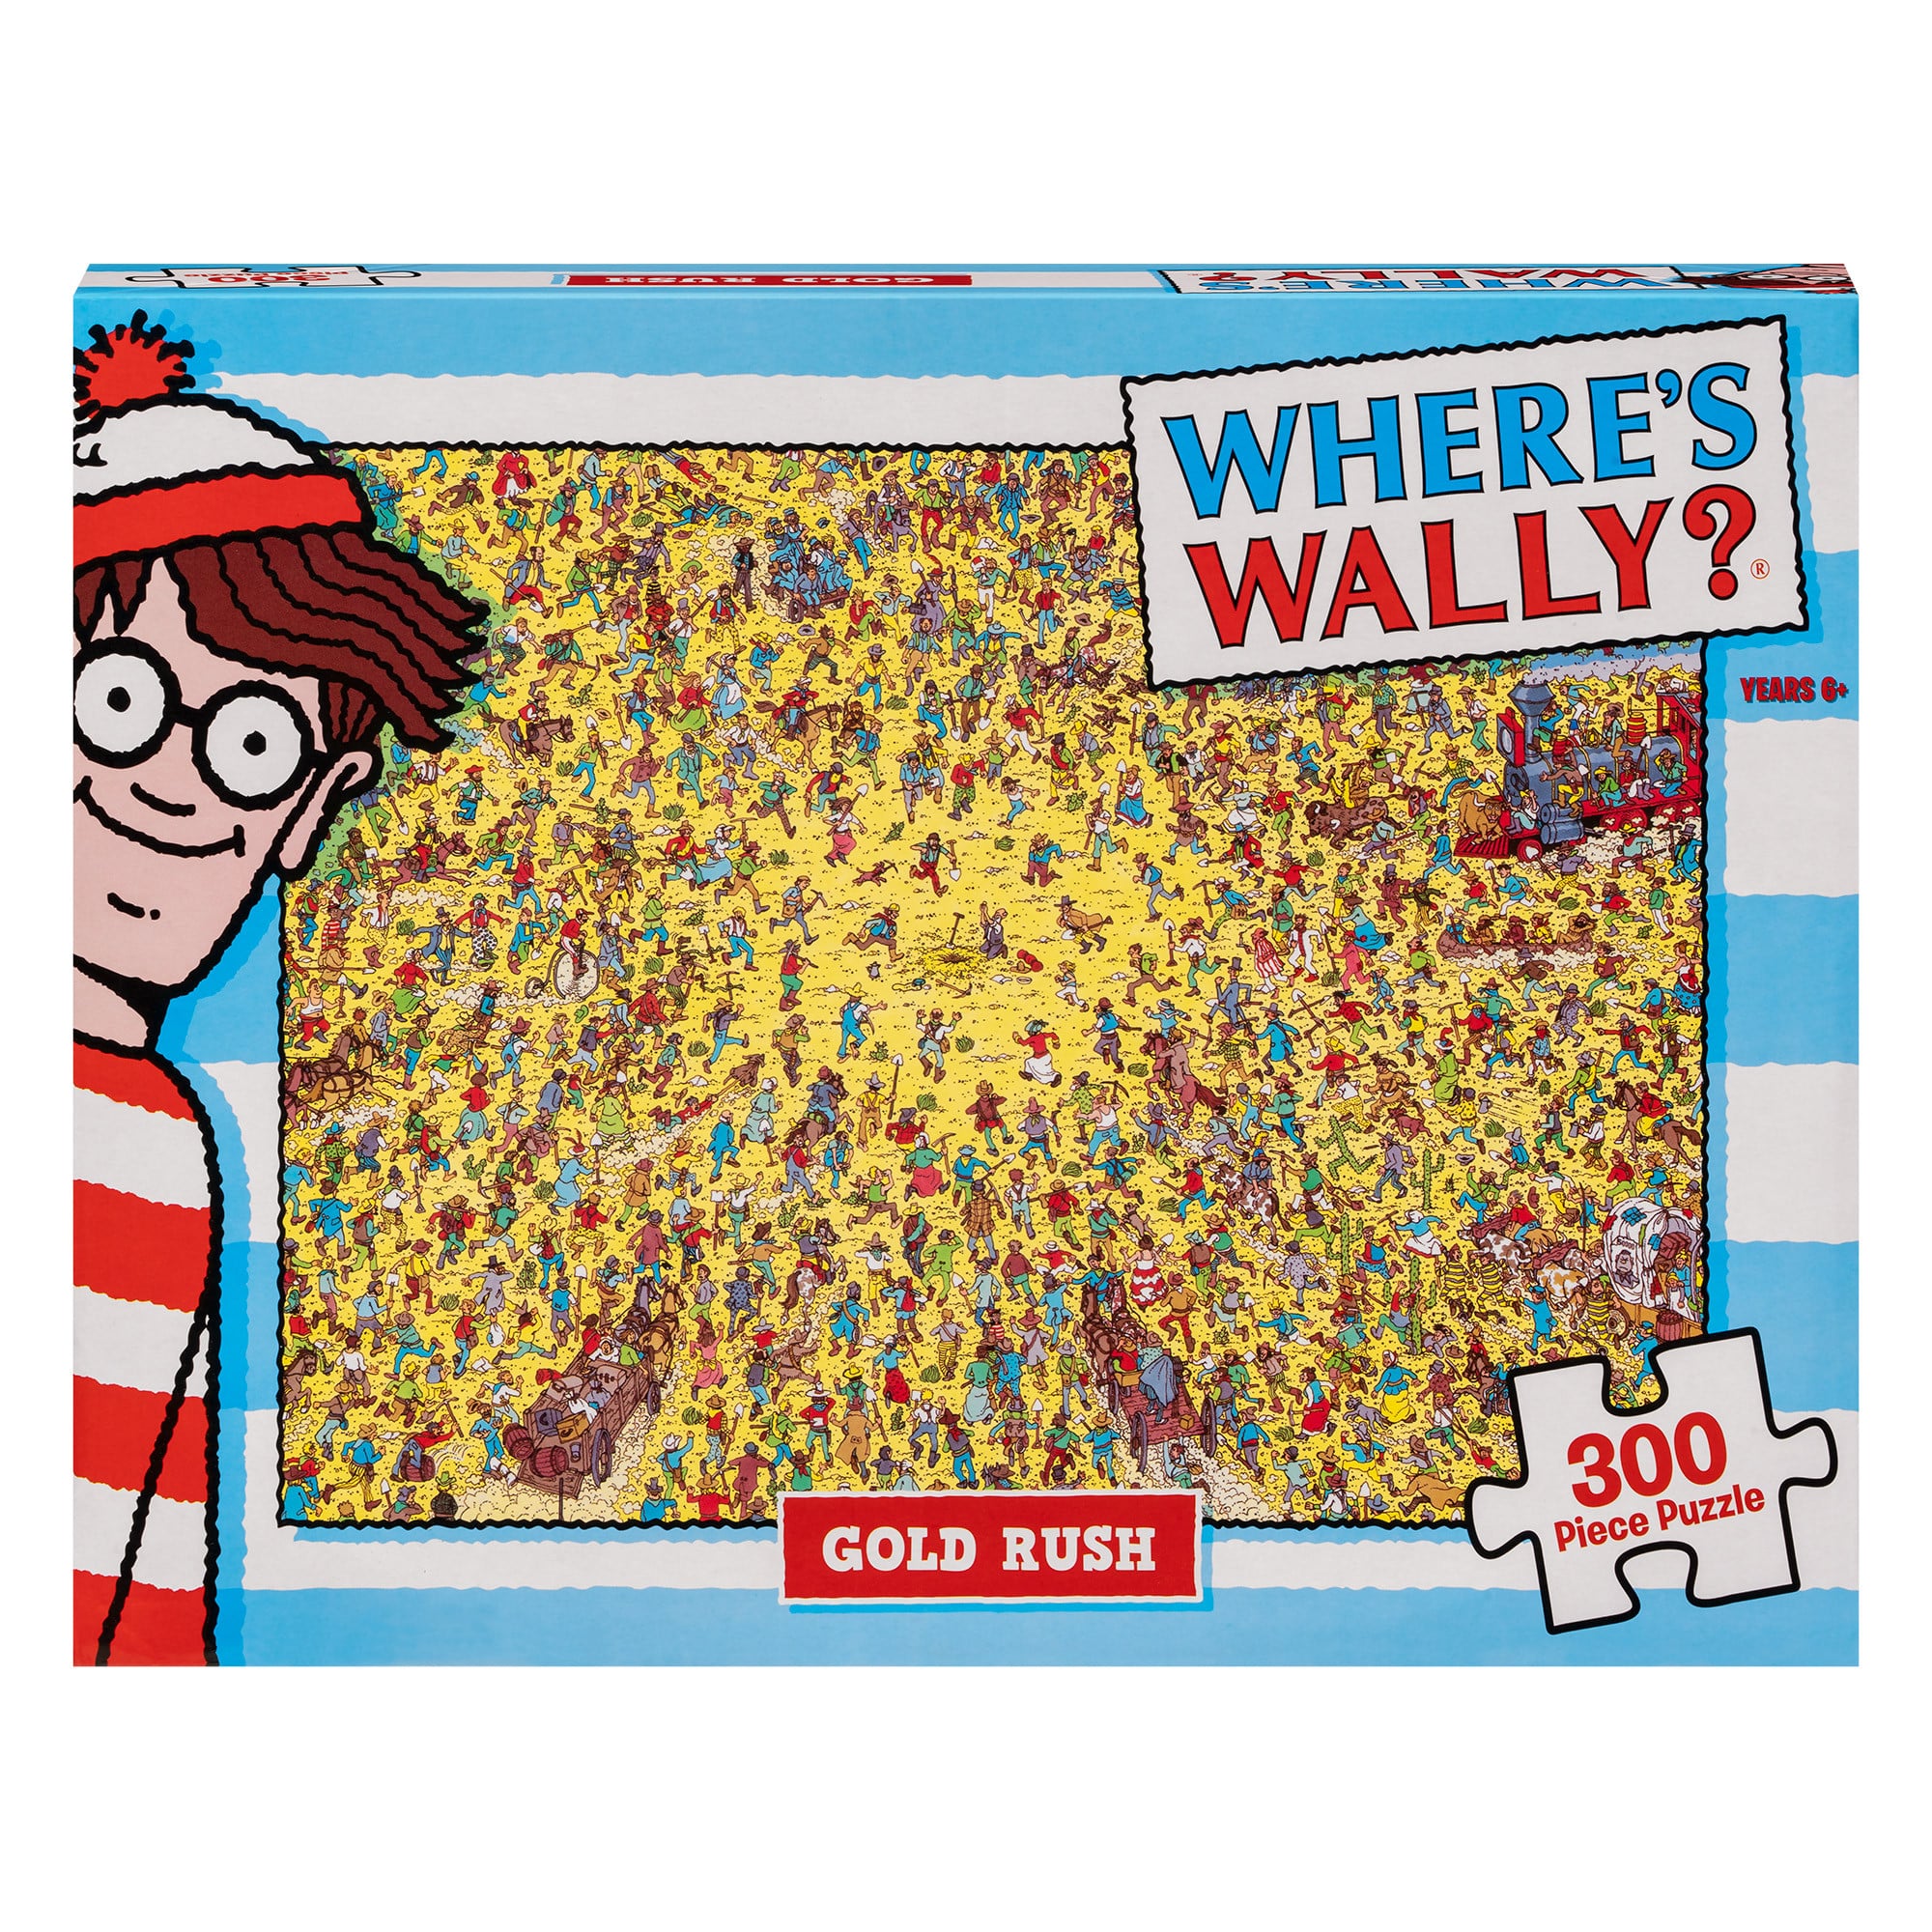 Where's Wally? - 300 Piece Jigsaw Puzzle Assortment